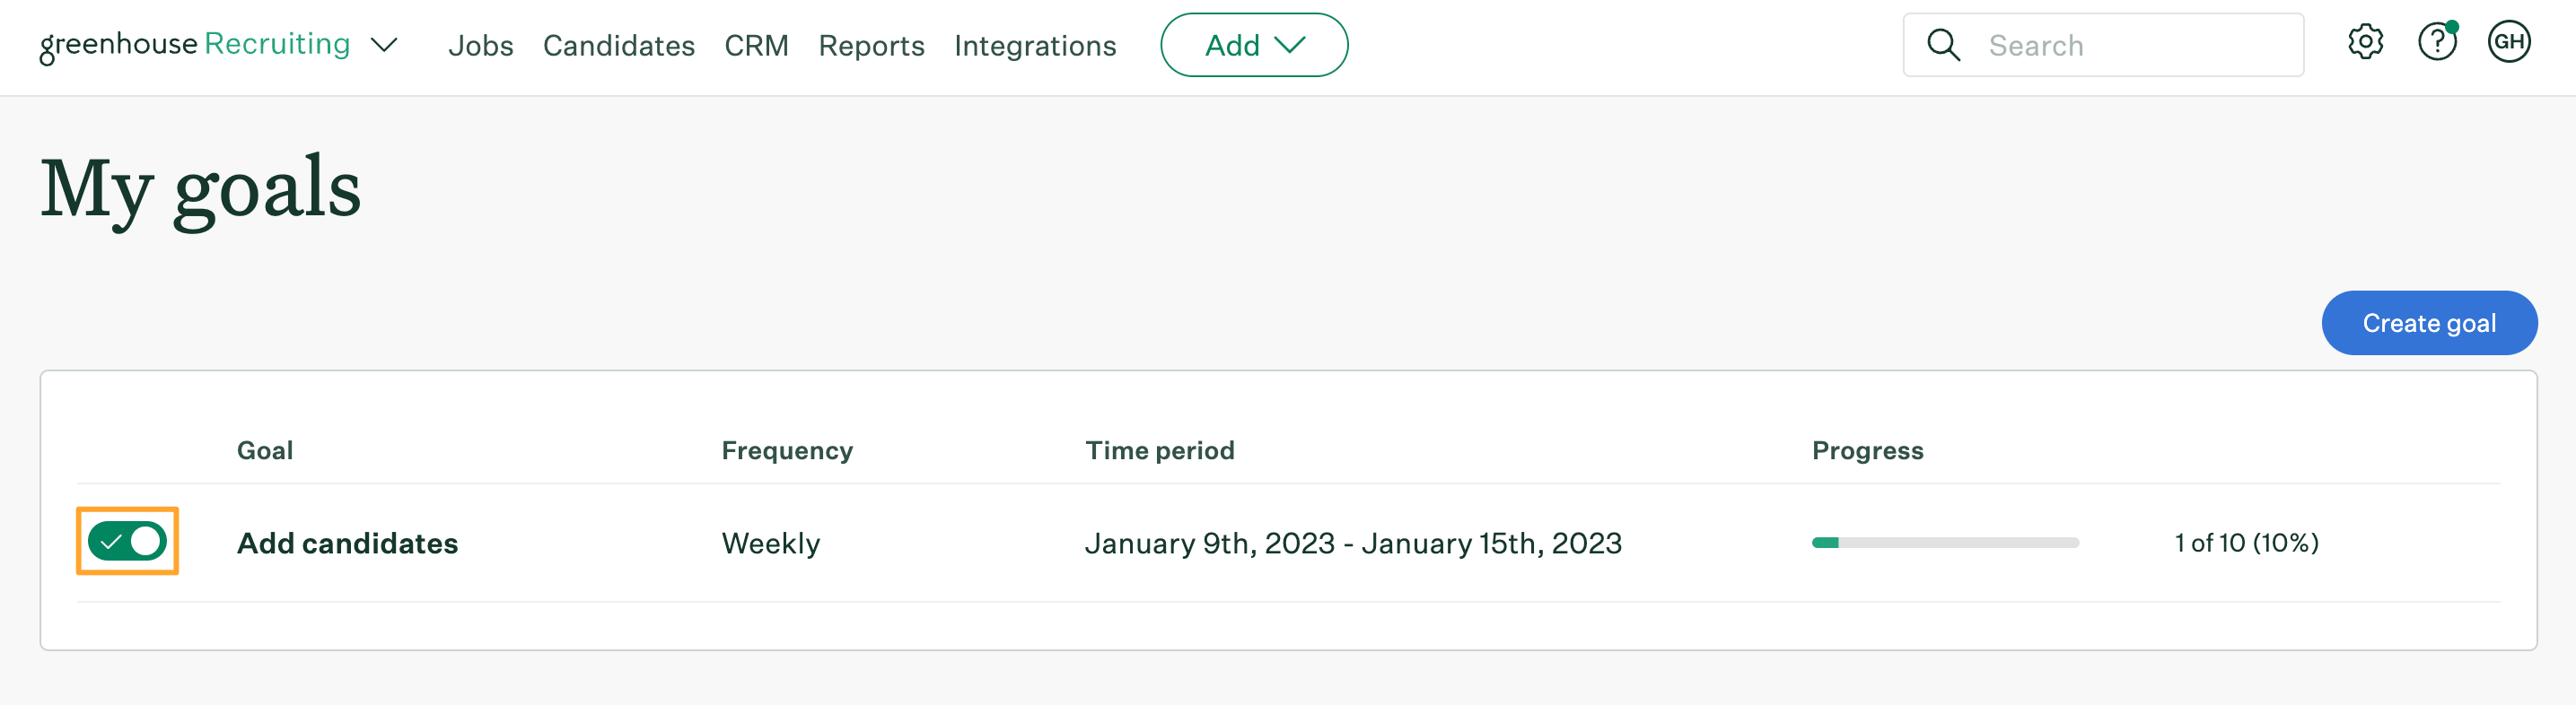 Screenshot-of-my-goals-page-with-toggle-off-button-highlighted.png